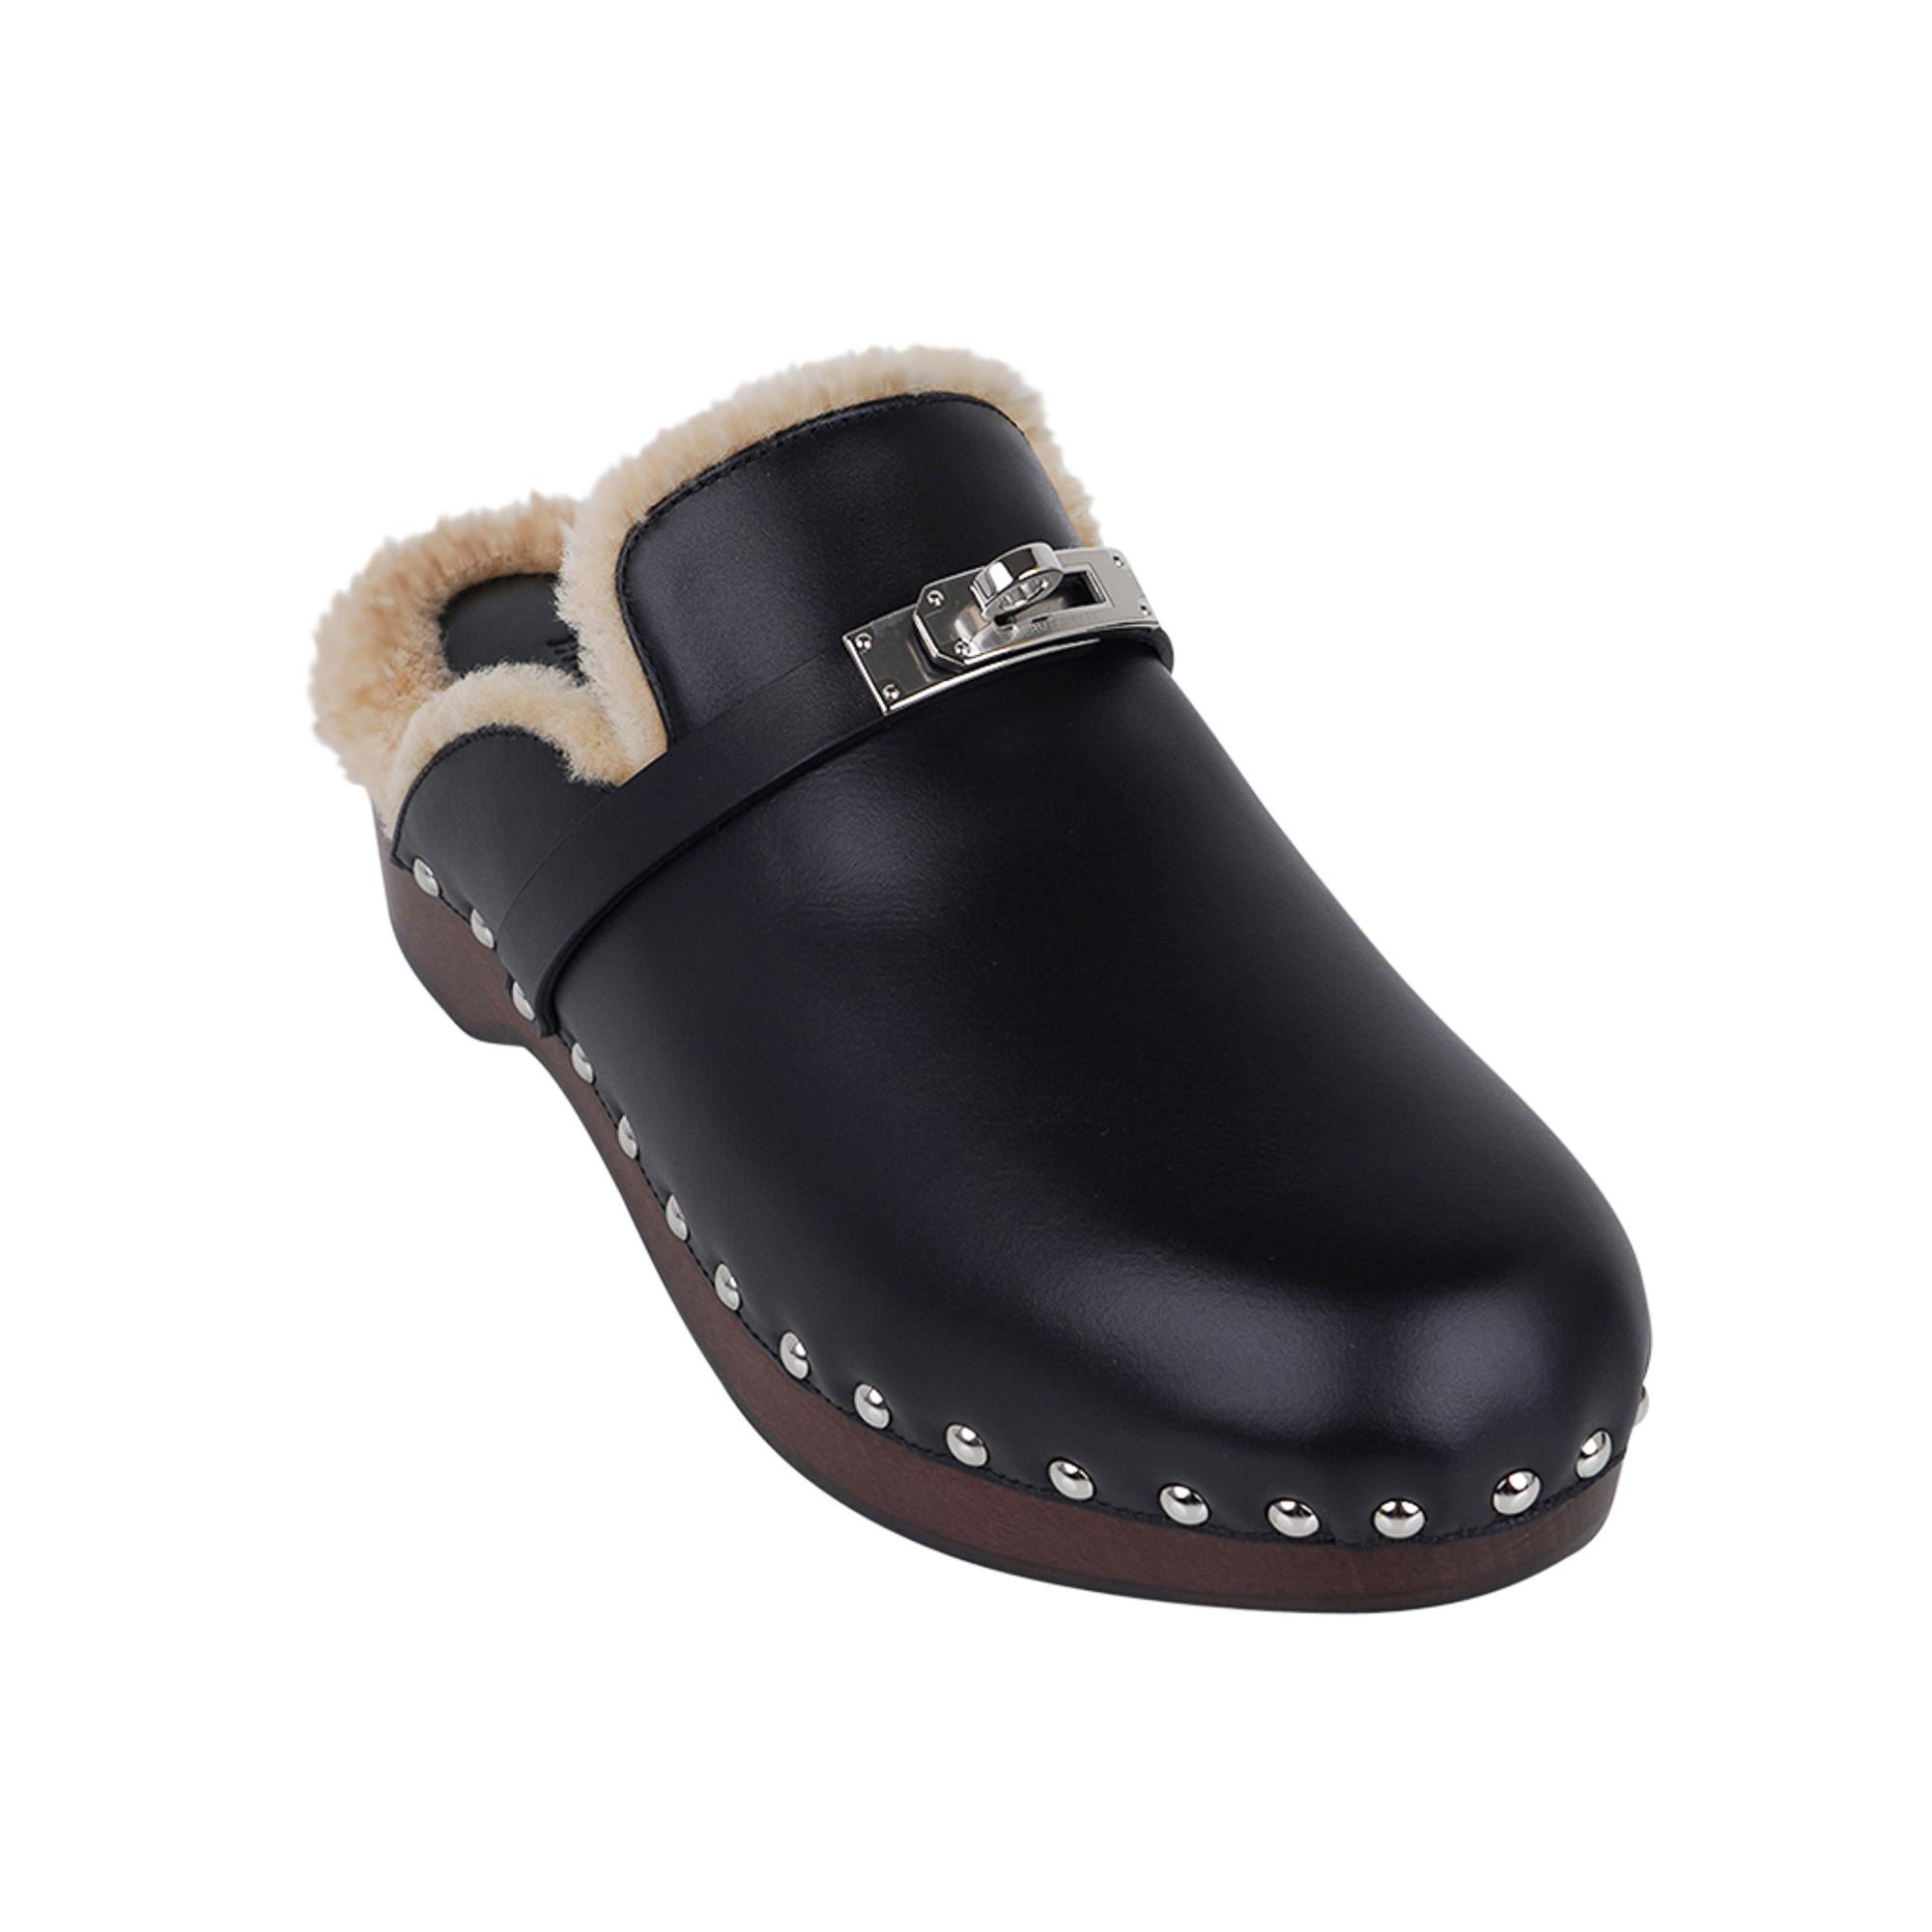 Hermes Carlotta Mules Black Calfskin / Shearling Palladium Kelly Buckle 36 / 6 In New Condition For Sale In Miami, FL